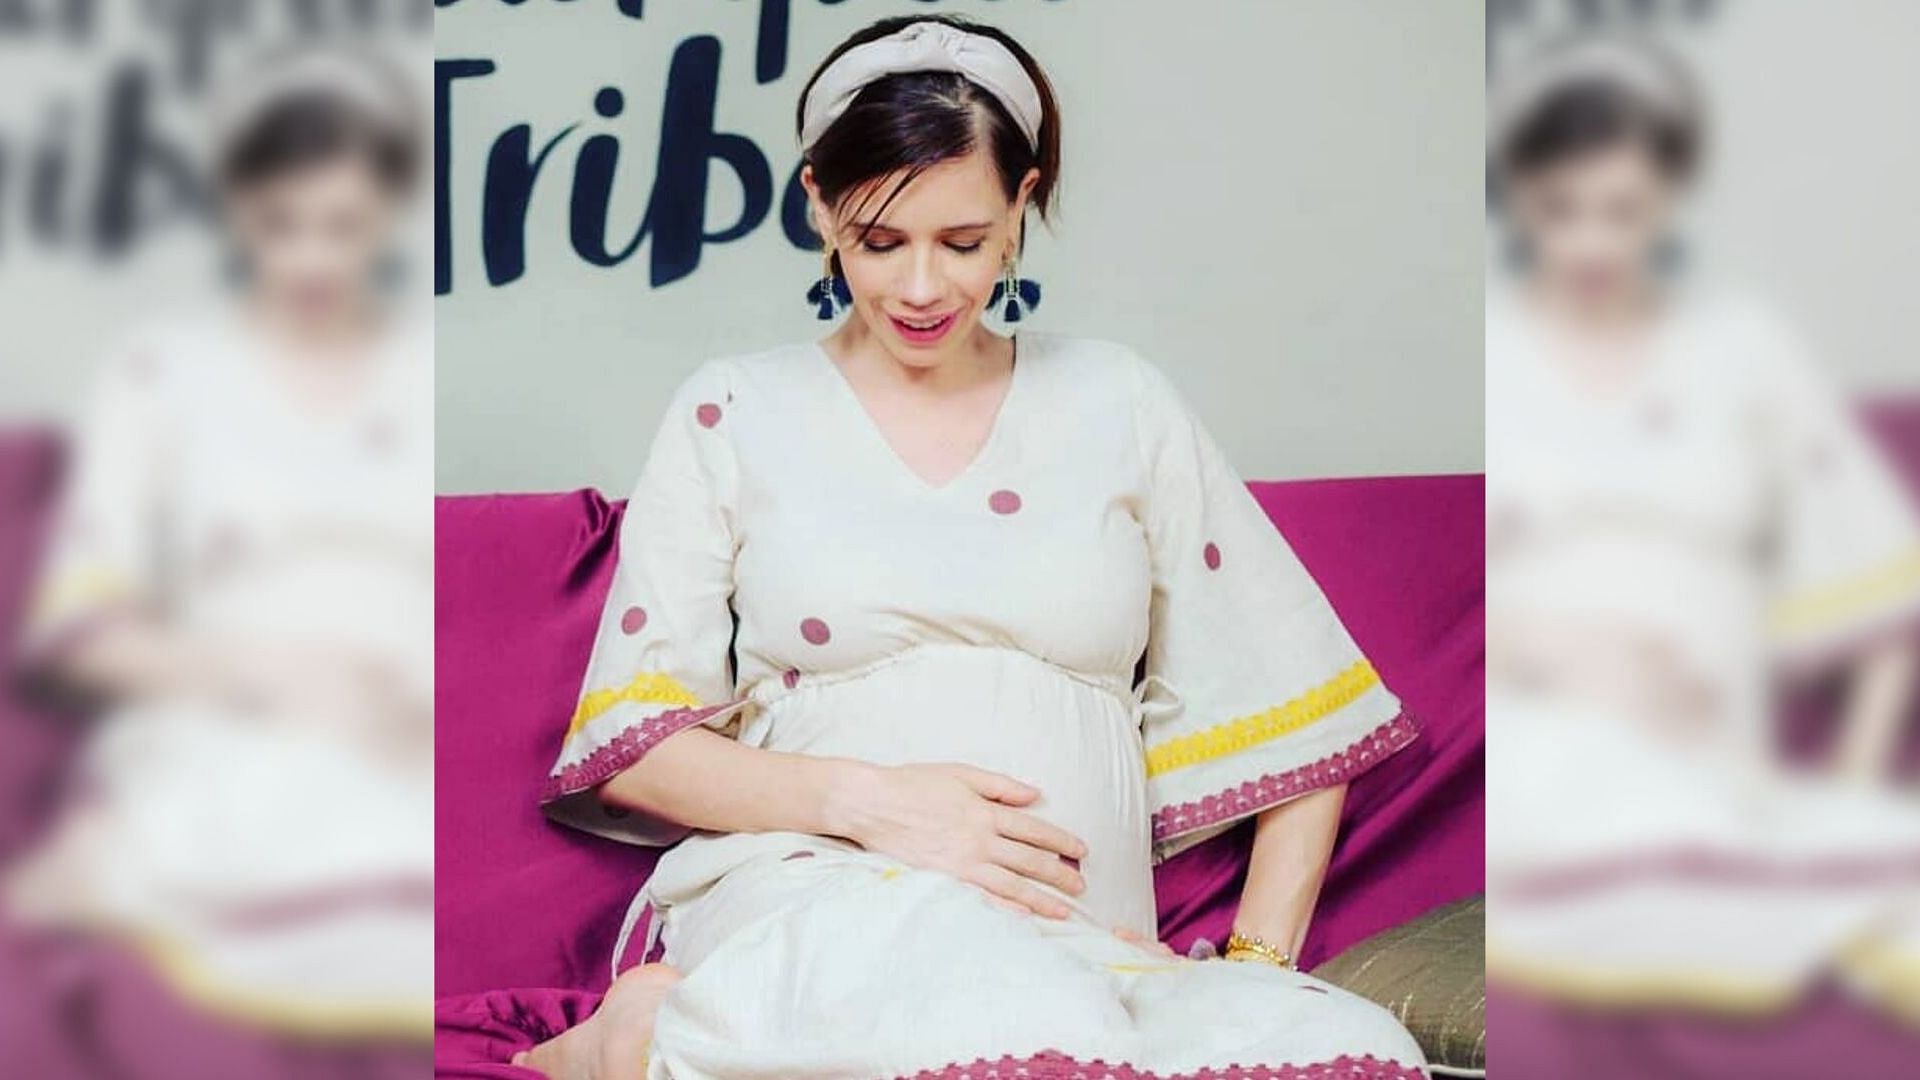 Kalki Koechlin will soon welcome her first child with Guy Hershberg.